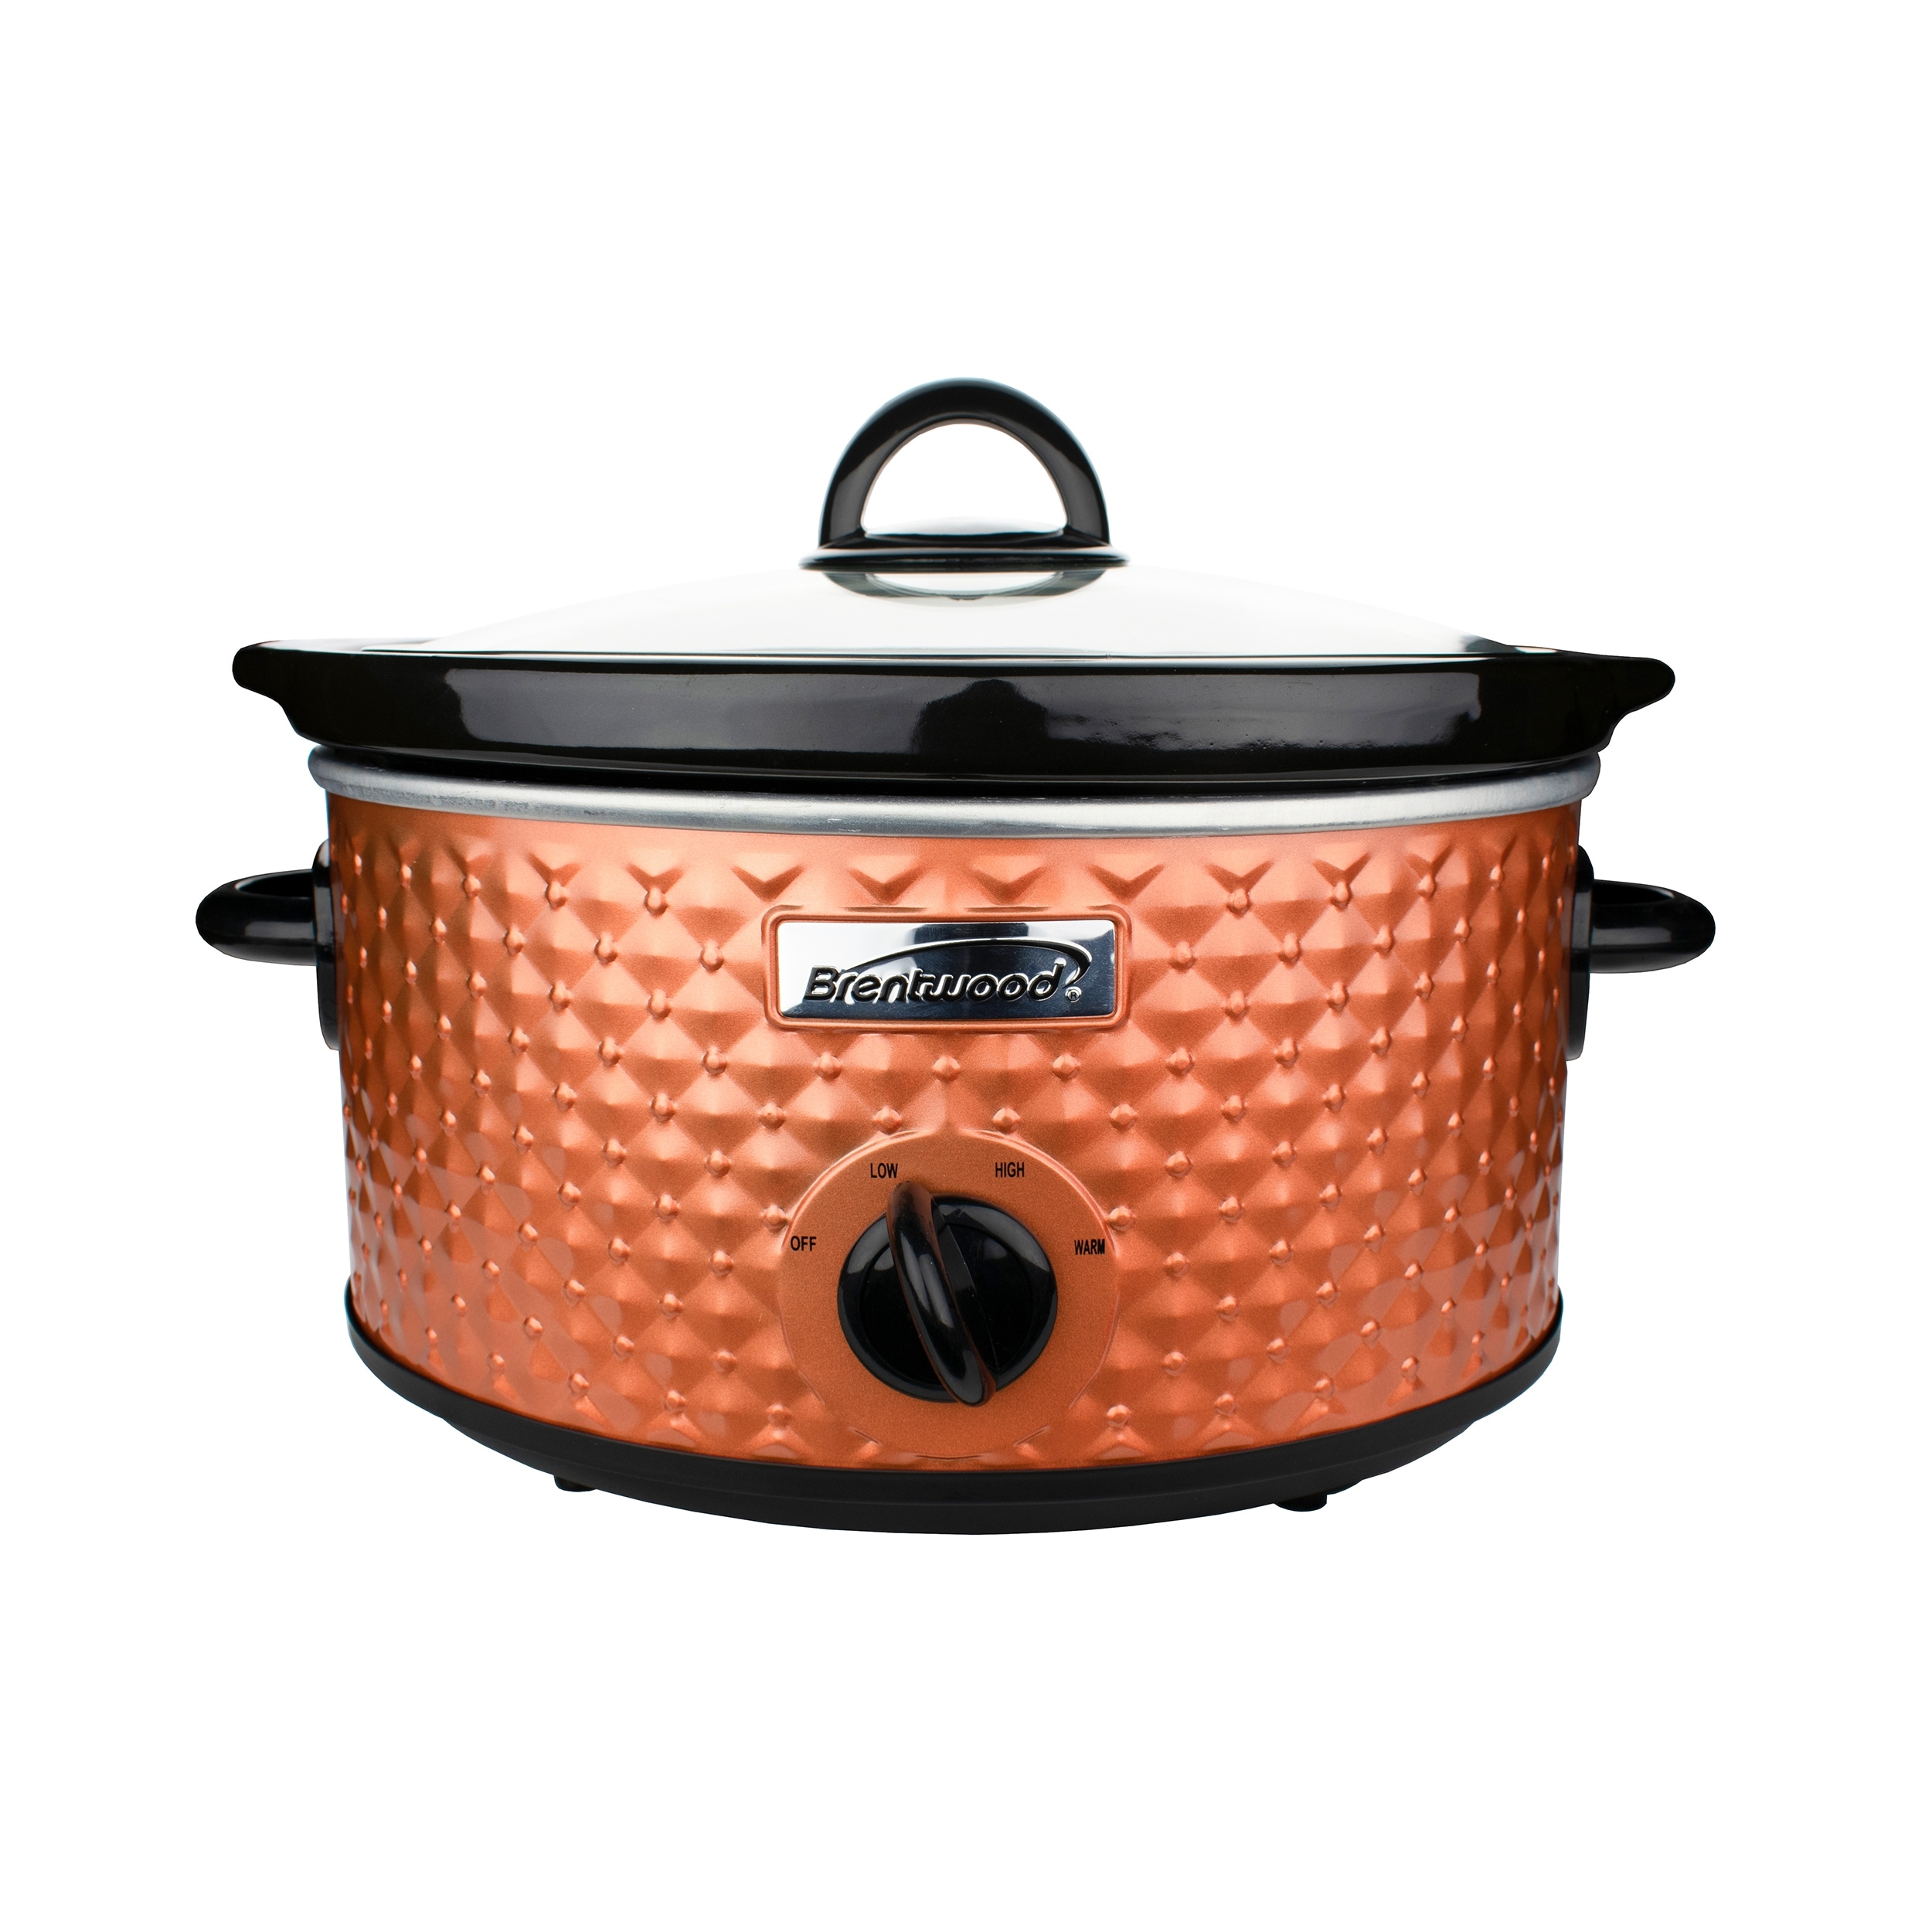 https://ak1.ostkcdn.com/images/products/is/images/direct/2780da7c700dd5b9aacb56ecbabfa12ca1aa7e55/14-Cup-Argyle-Slow-Cooker-in-Bronze.jpg